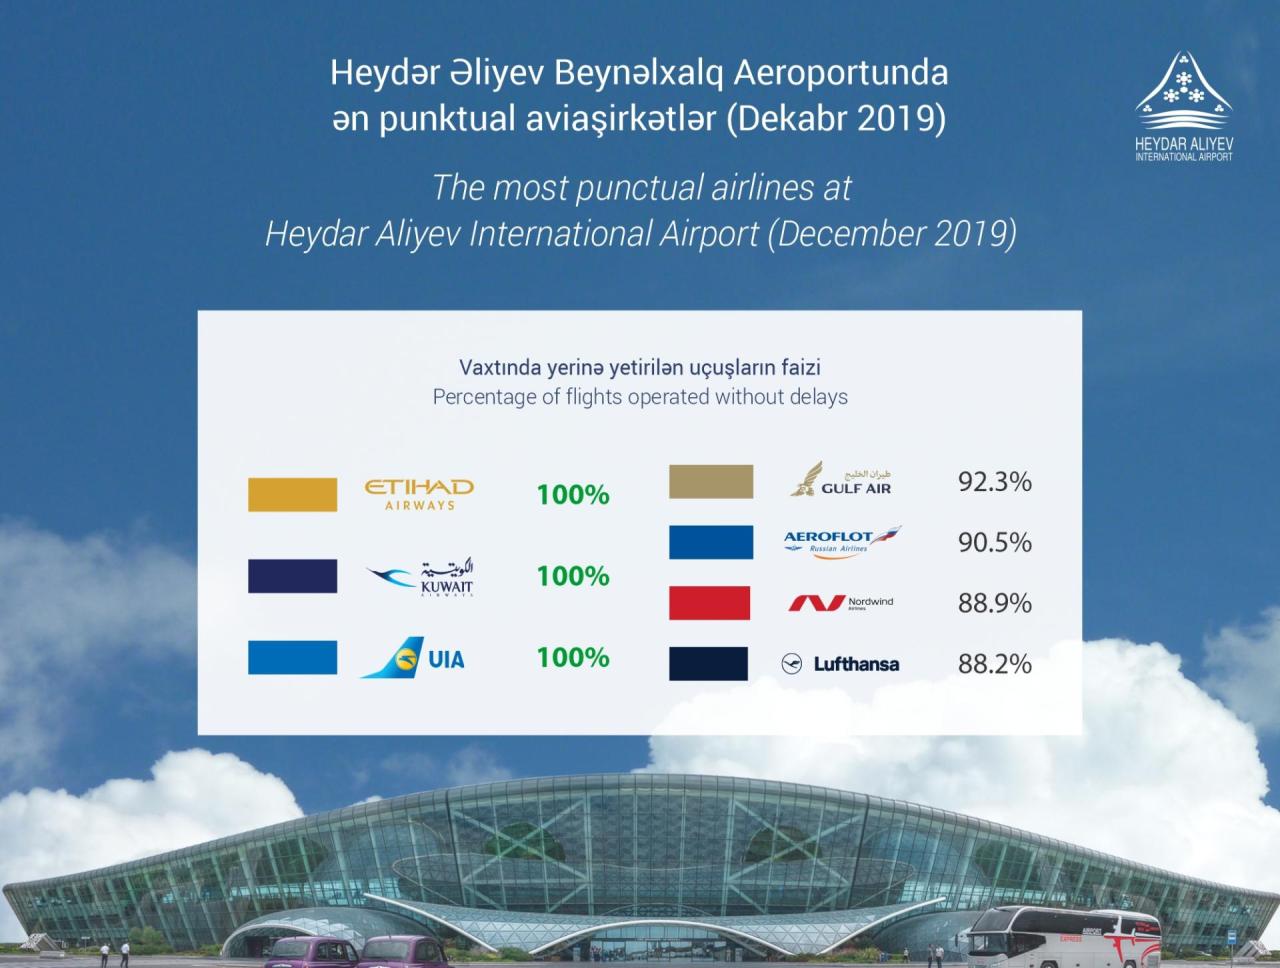 Heydar Aliyev Int’l Airport name most punctual airlines for December 2019